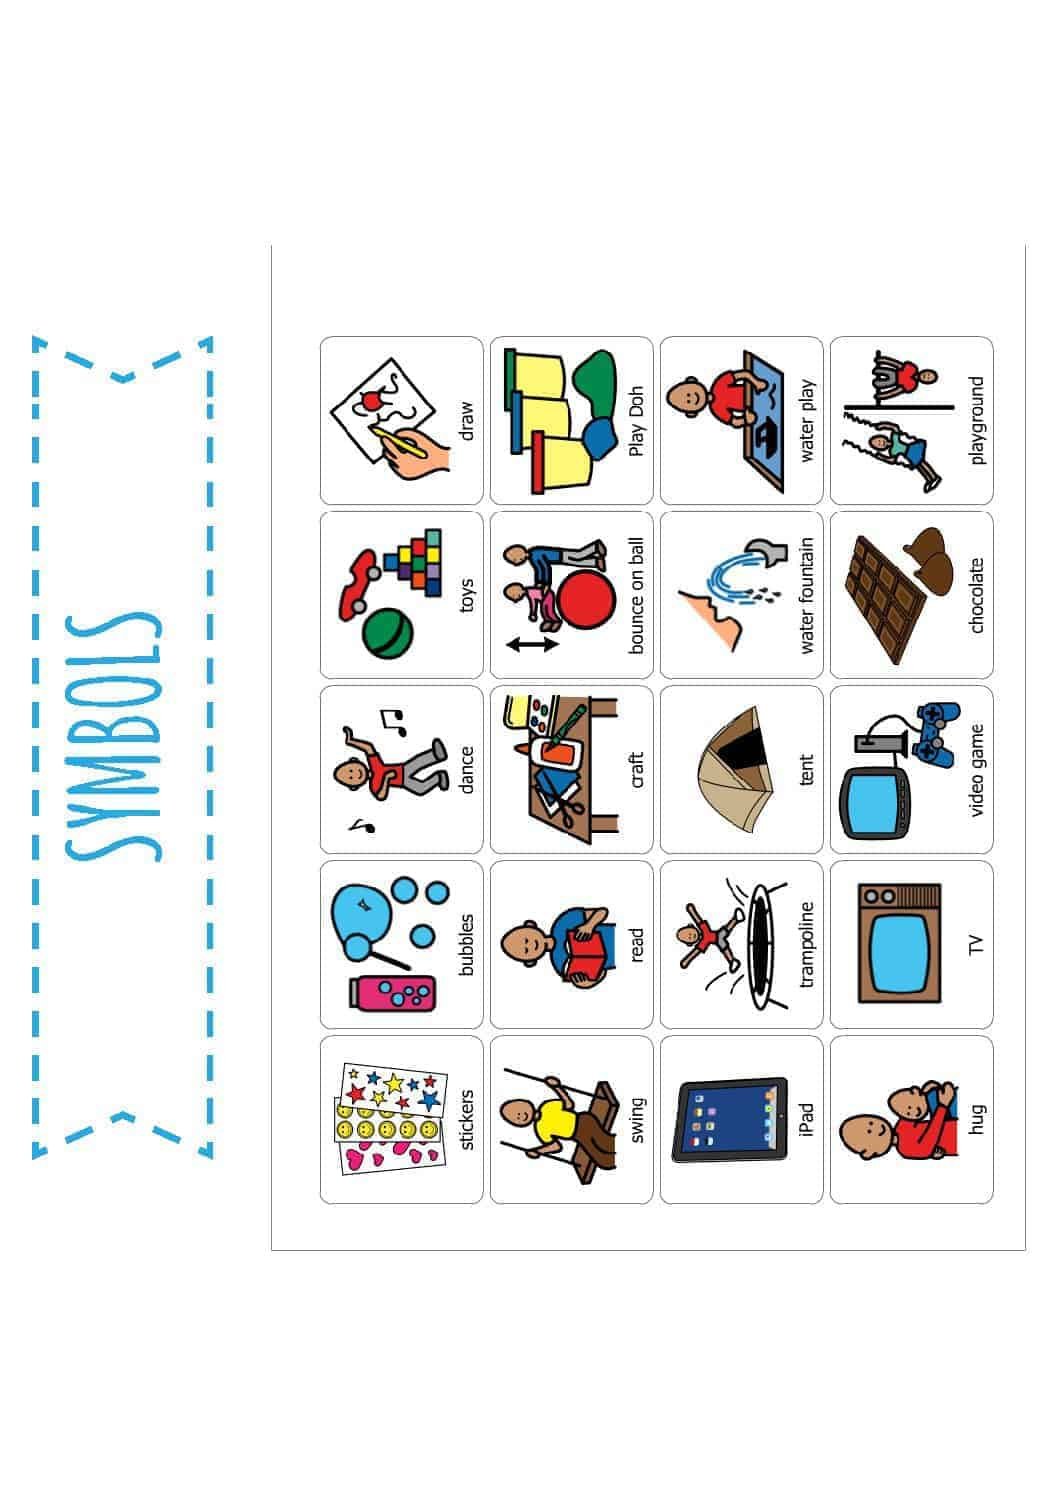 printable-choice-board-for-autism-printable-word-searches